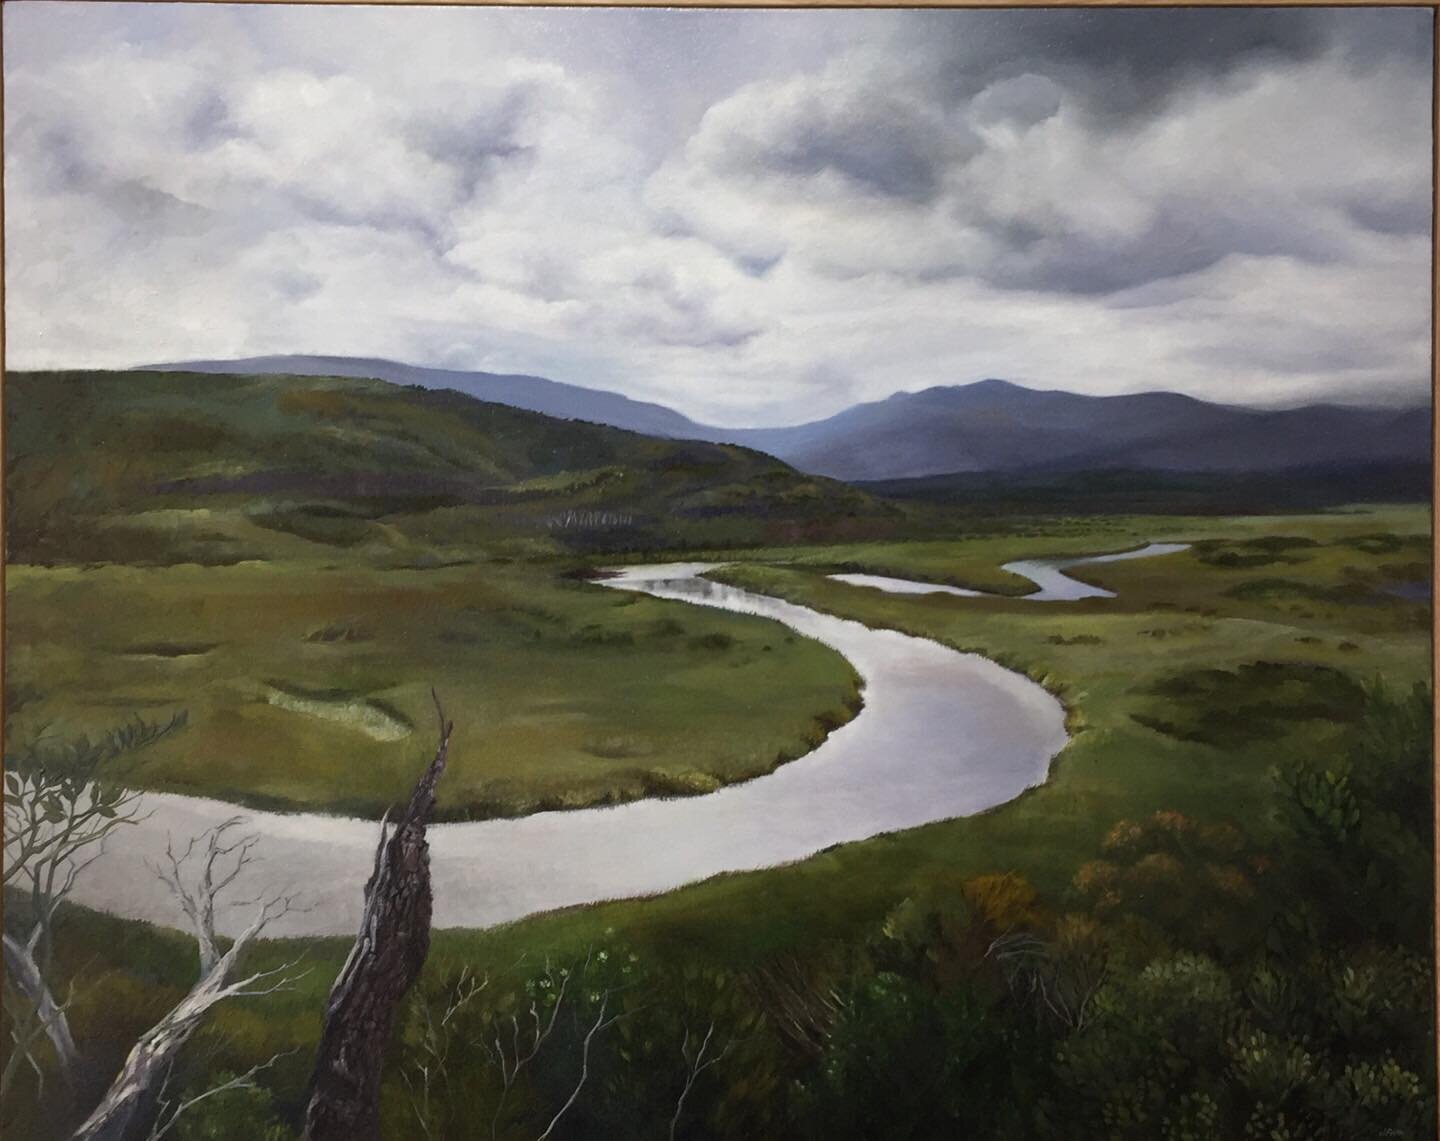 Oil painting of Darby River meandering through the grassy plain. I really enjoy painting skies, capturing that feeling of lightness is a challenge.  Always learning !
You can see this one @littleoberoncafe in Fish Creek. #janiefrithart #wilsonsprom #